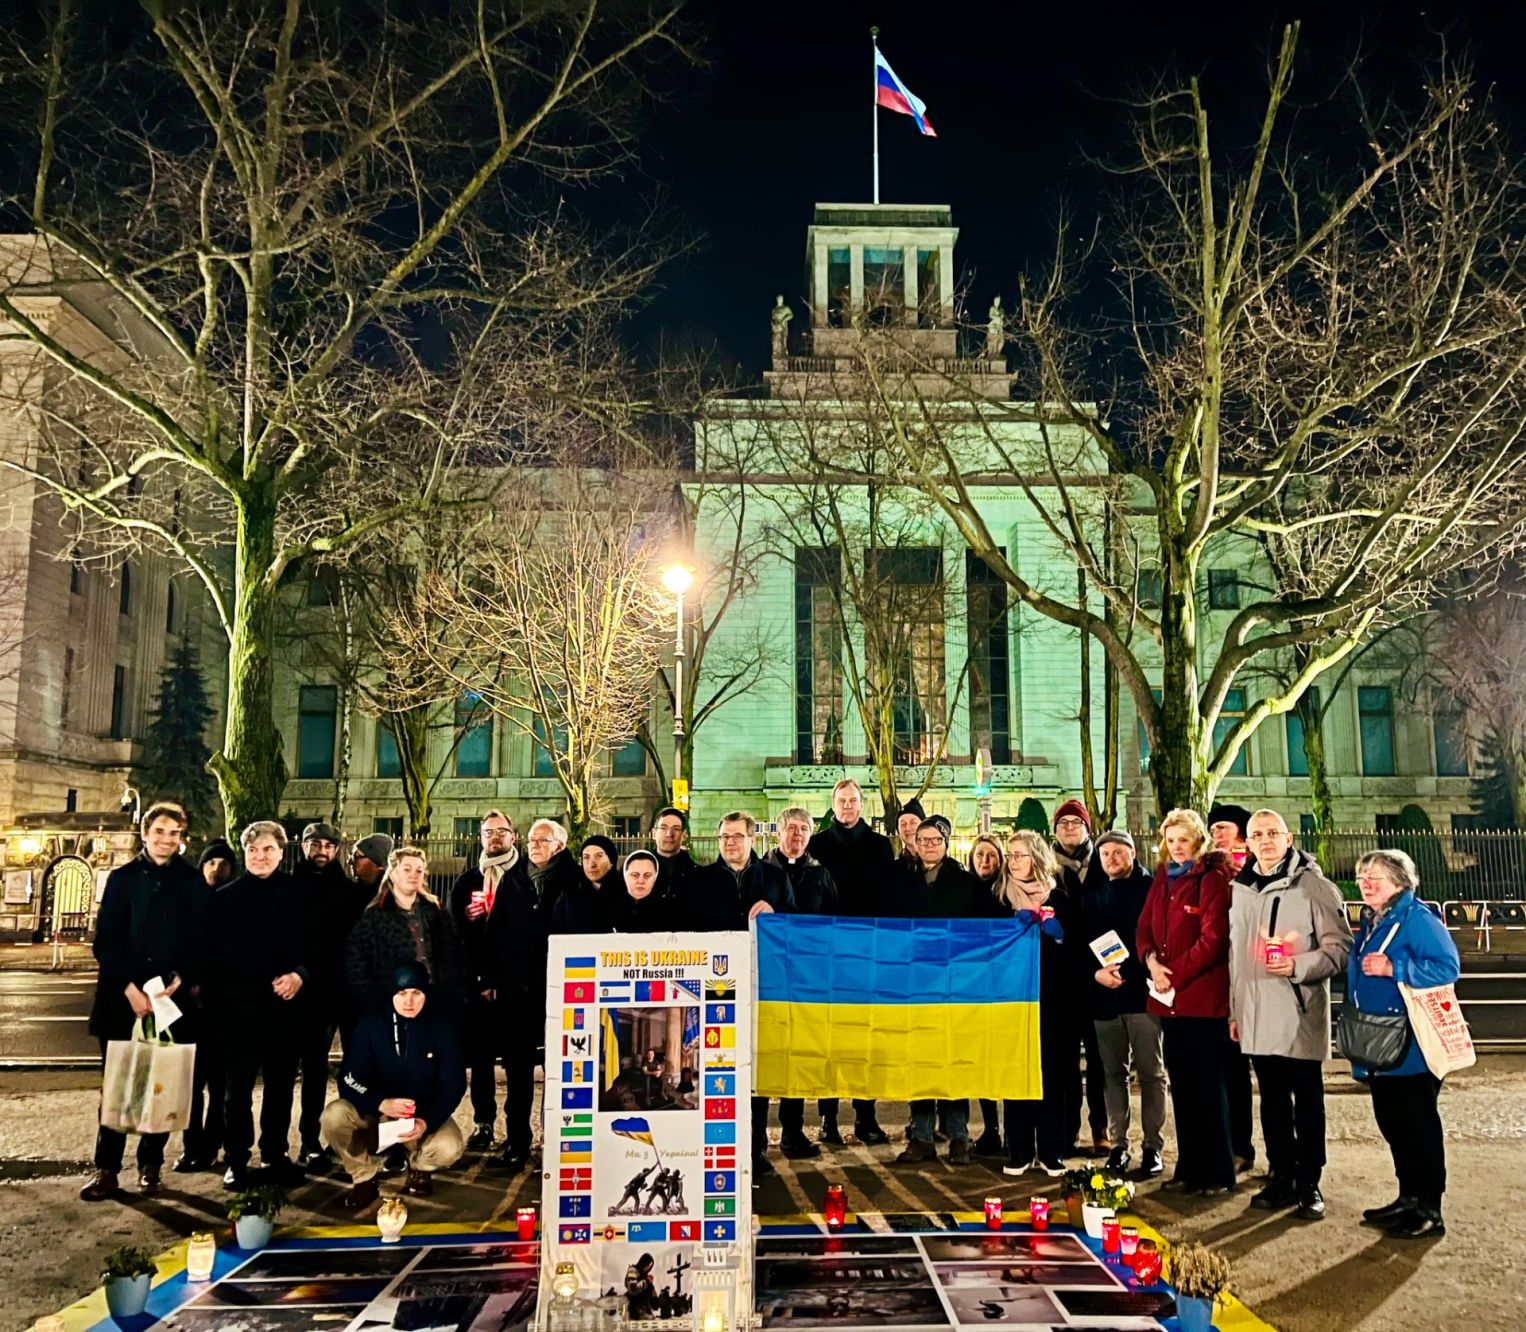 Continued solidarity with the people of Ukraine